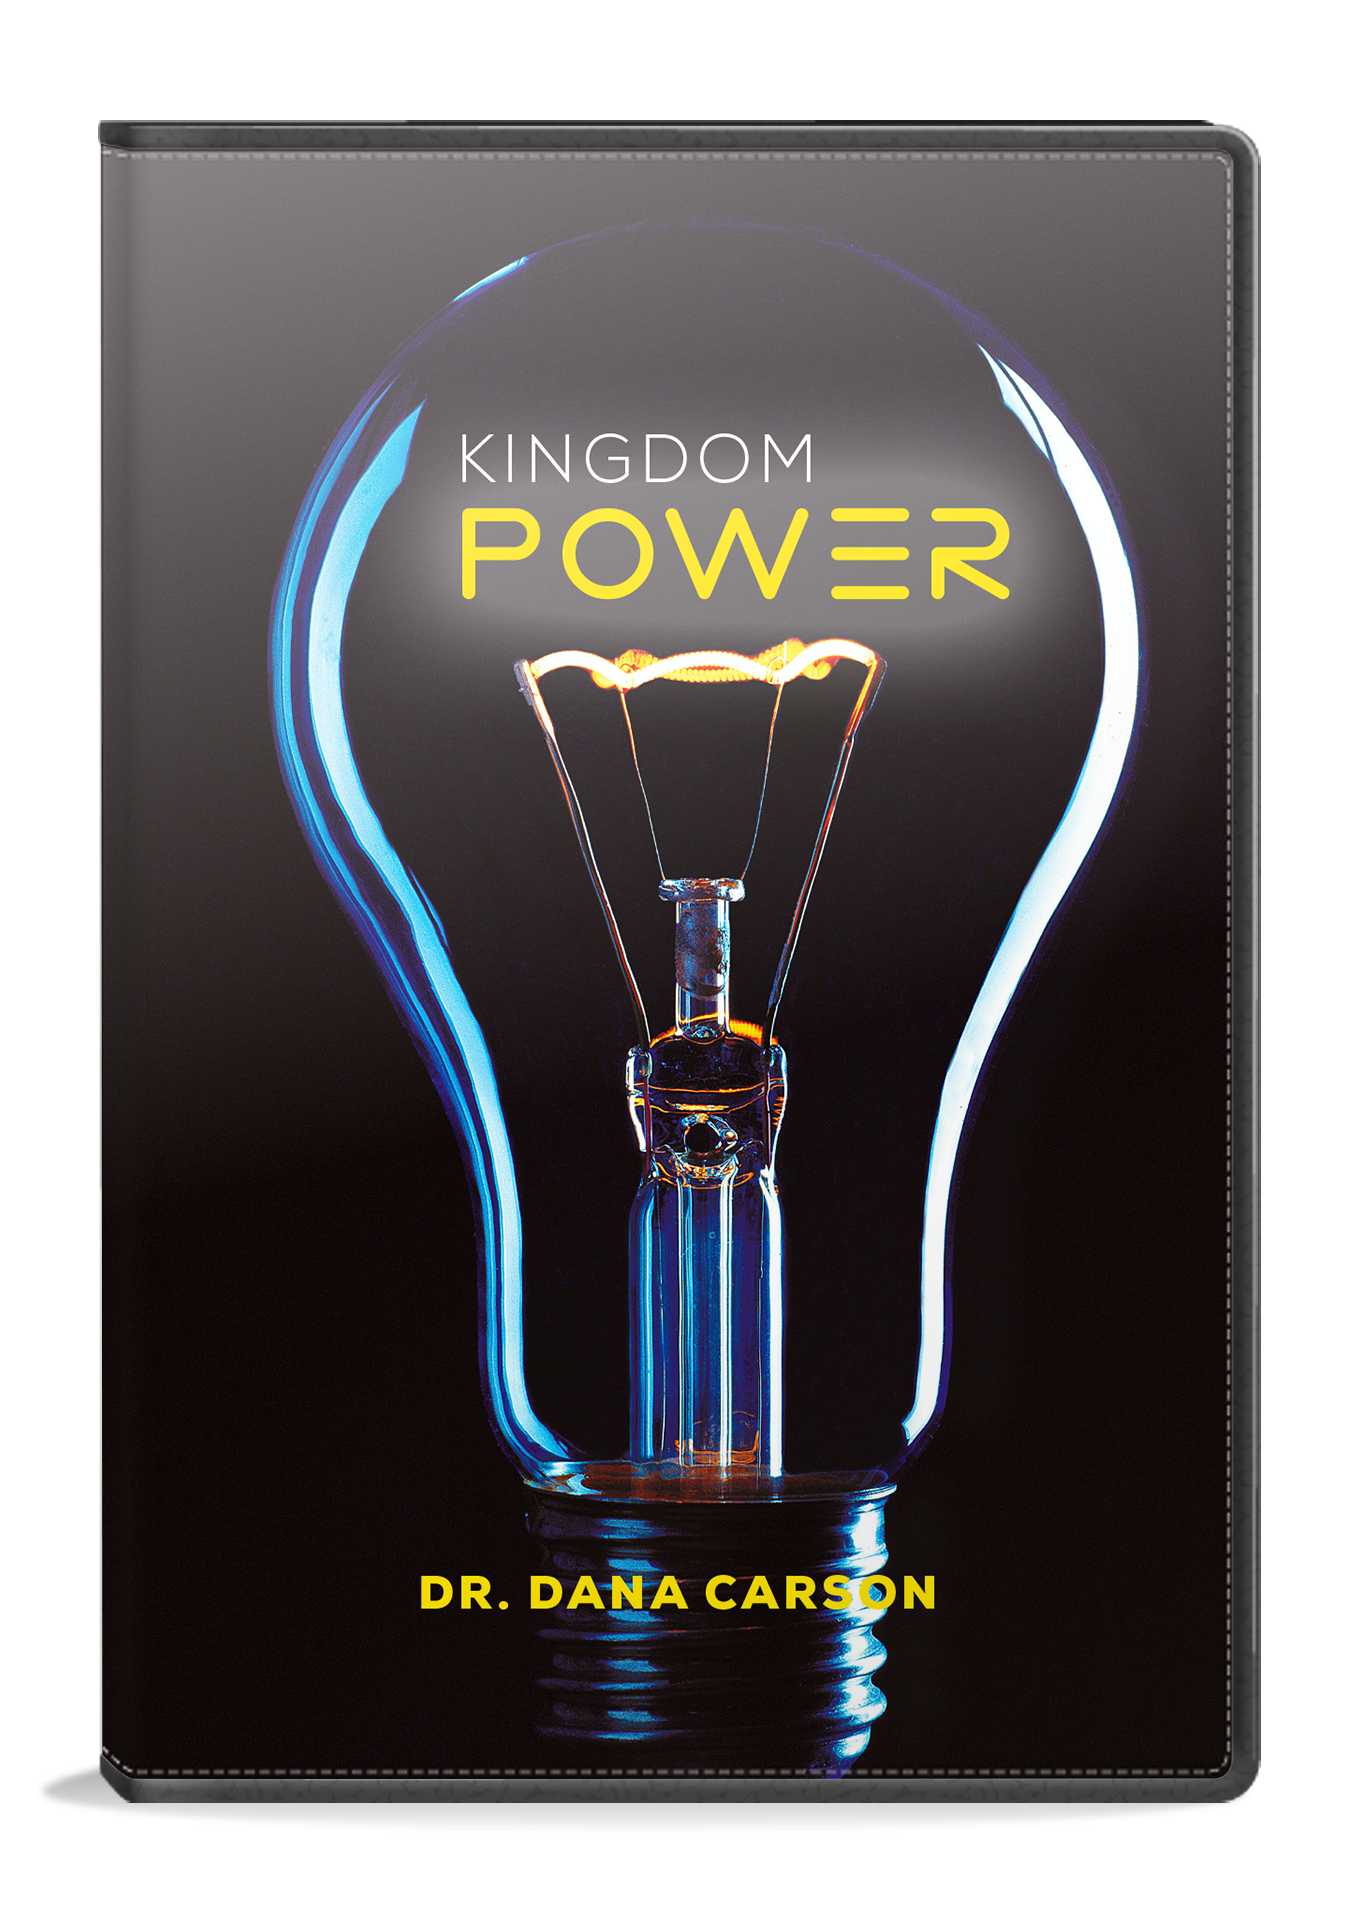 Operating in Kingdom Power - Part 2